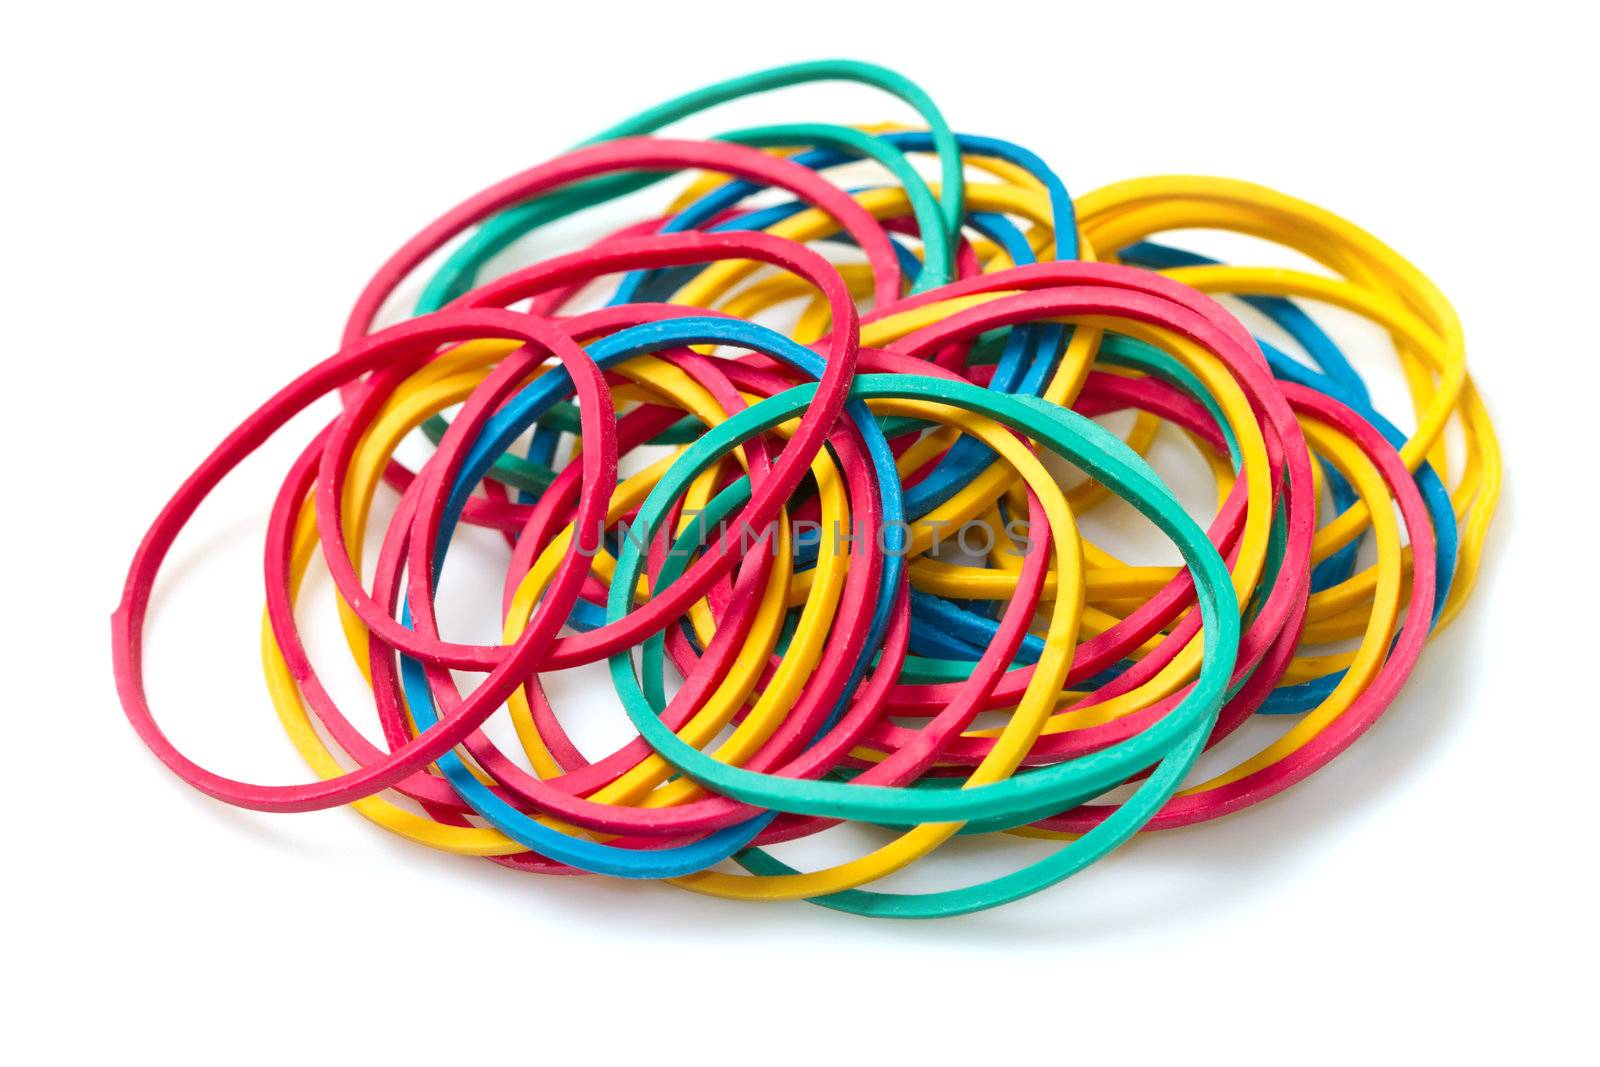 Colored rubber bands by lsantilli